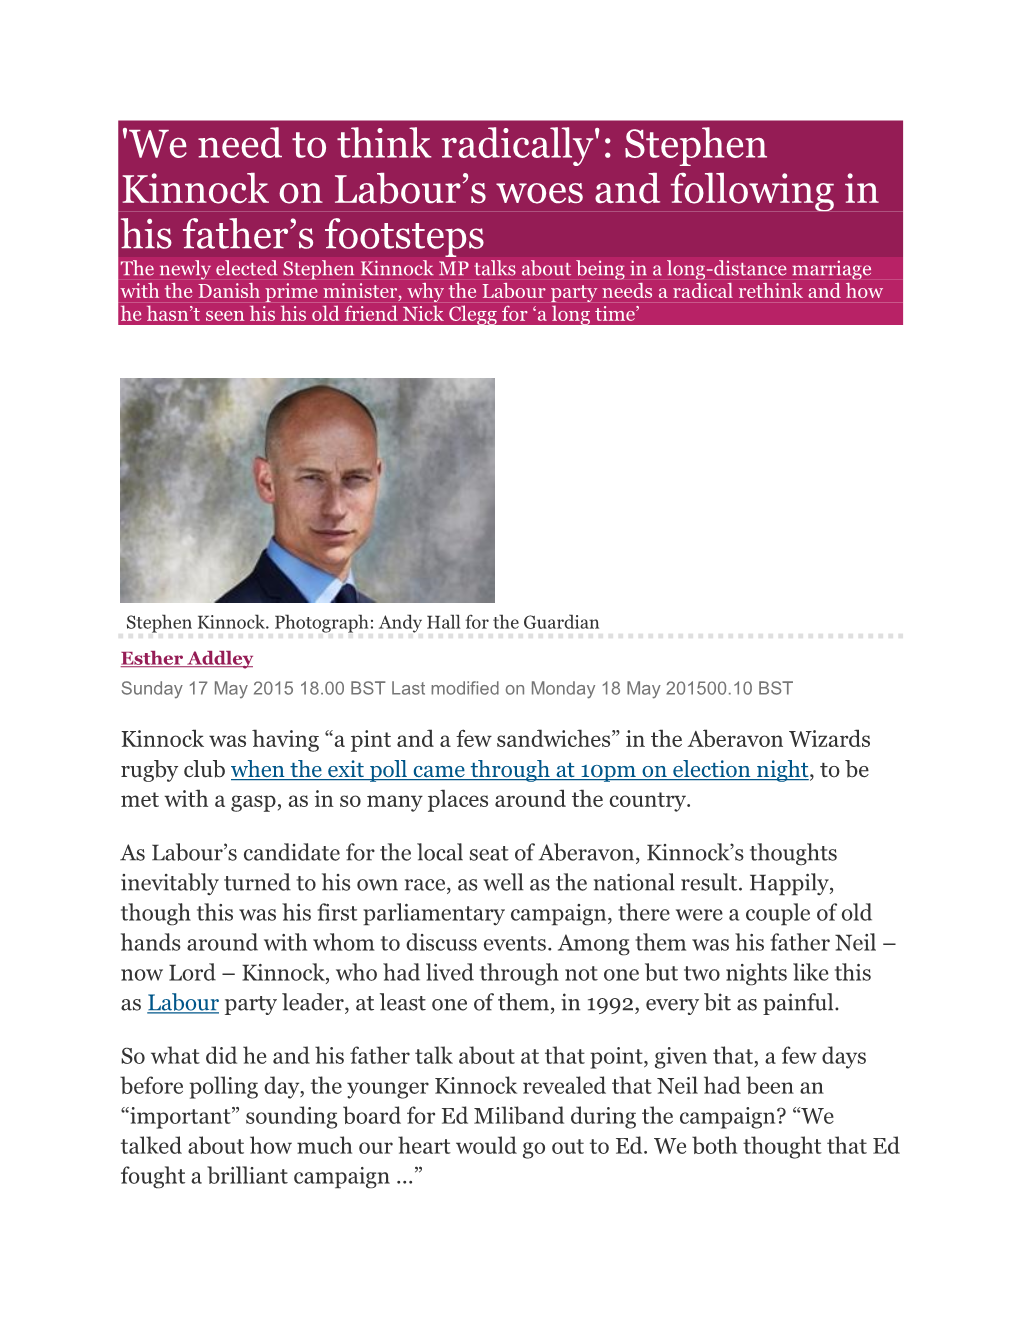 Stephen Kinnock on Labour's Woes and Following In